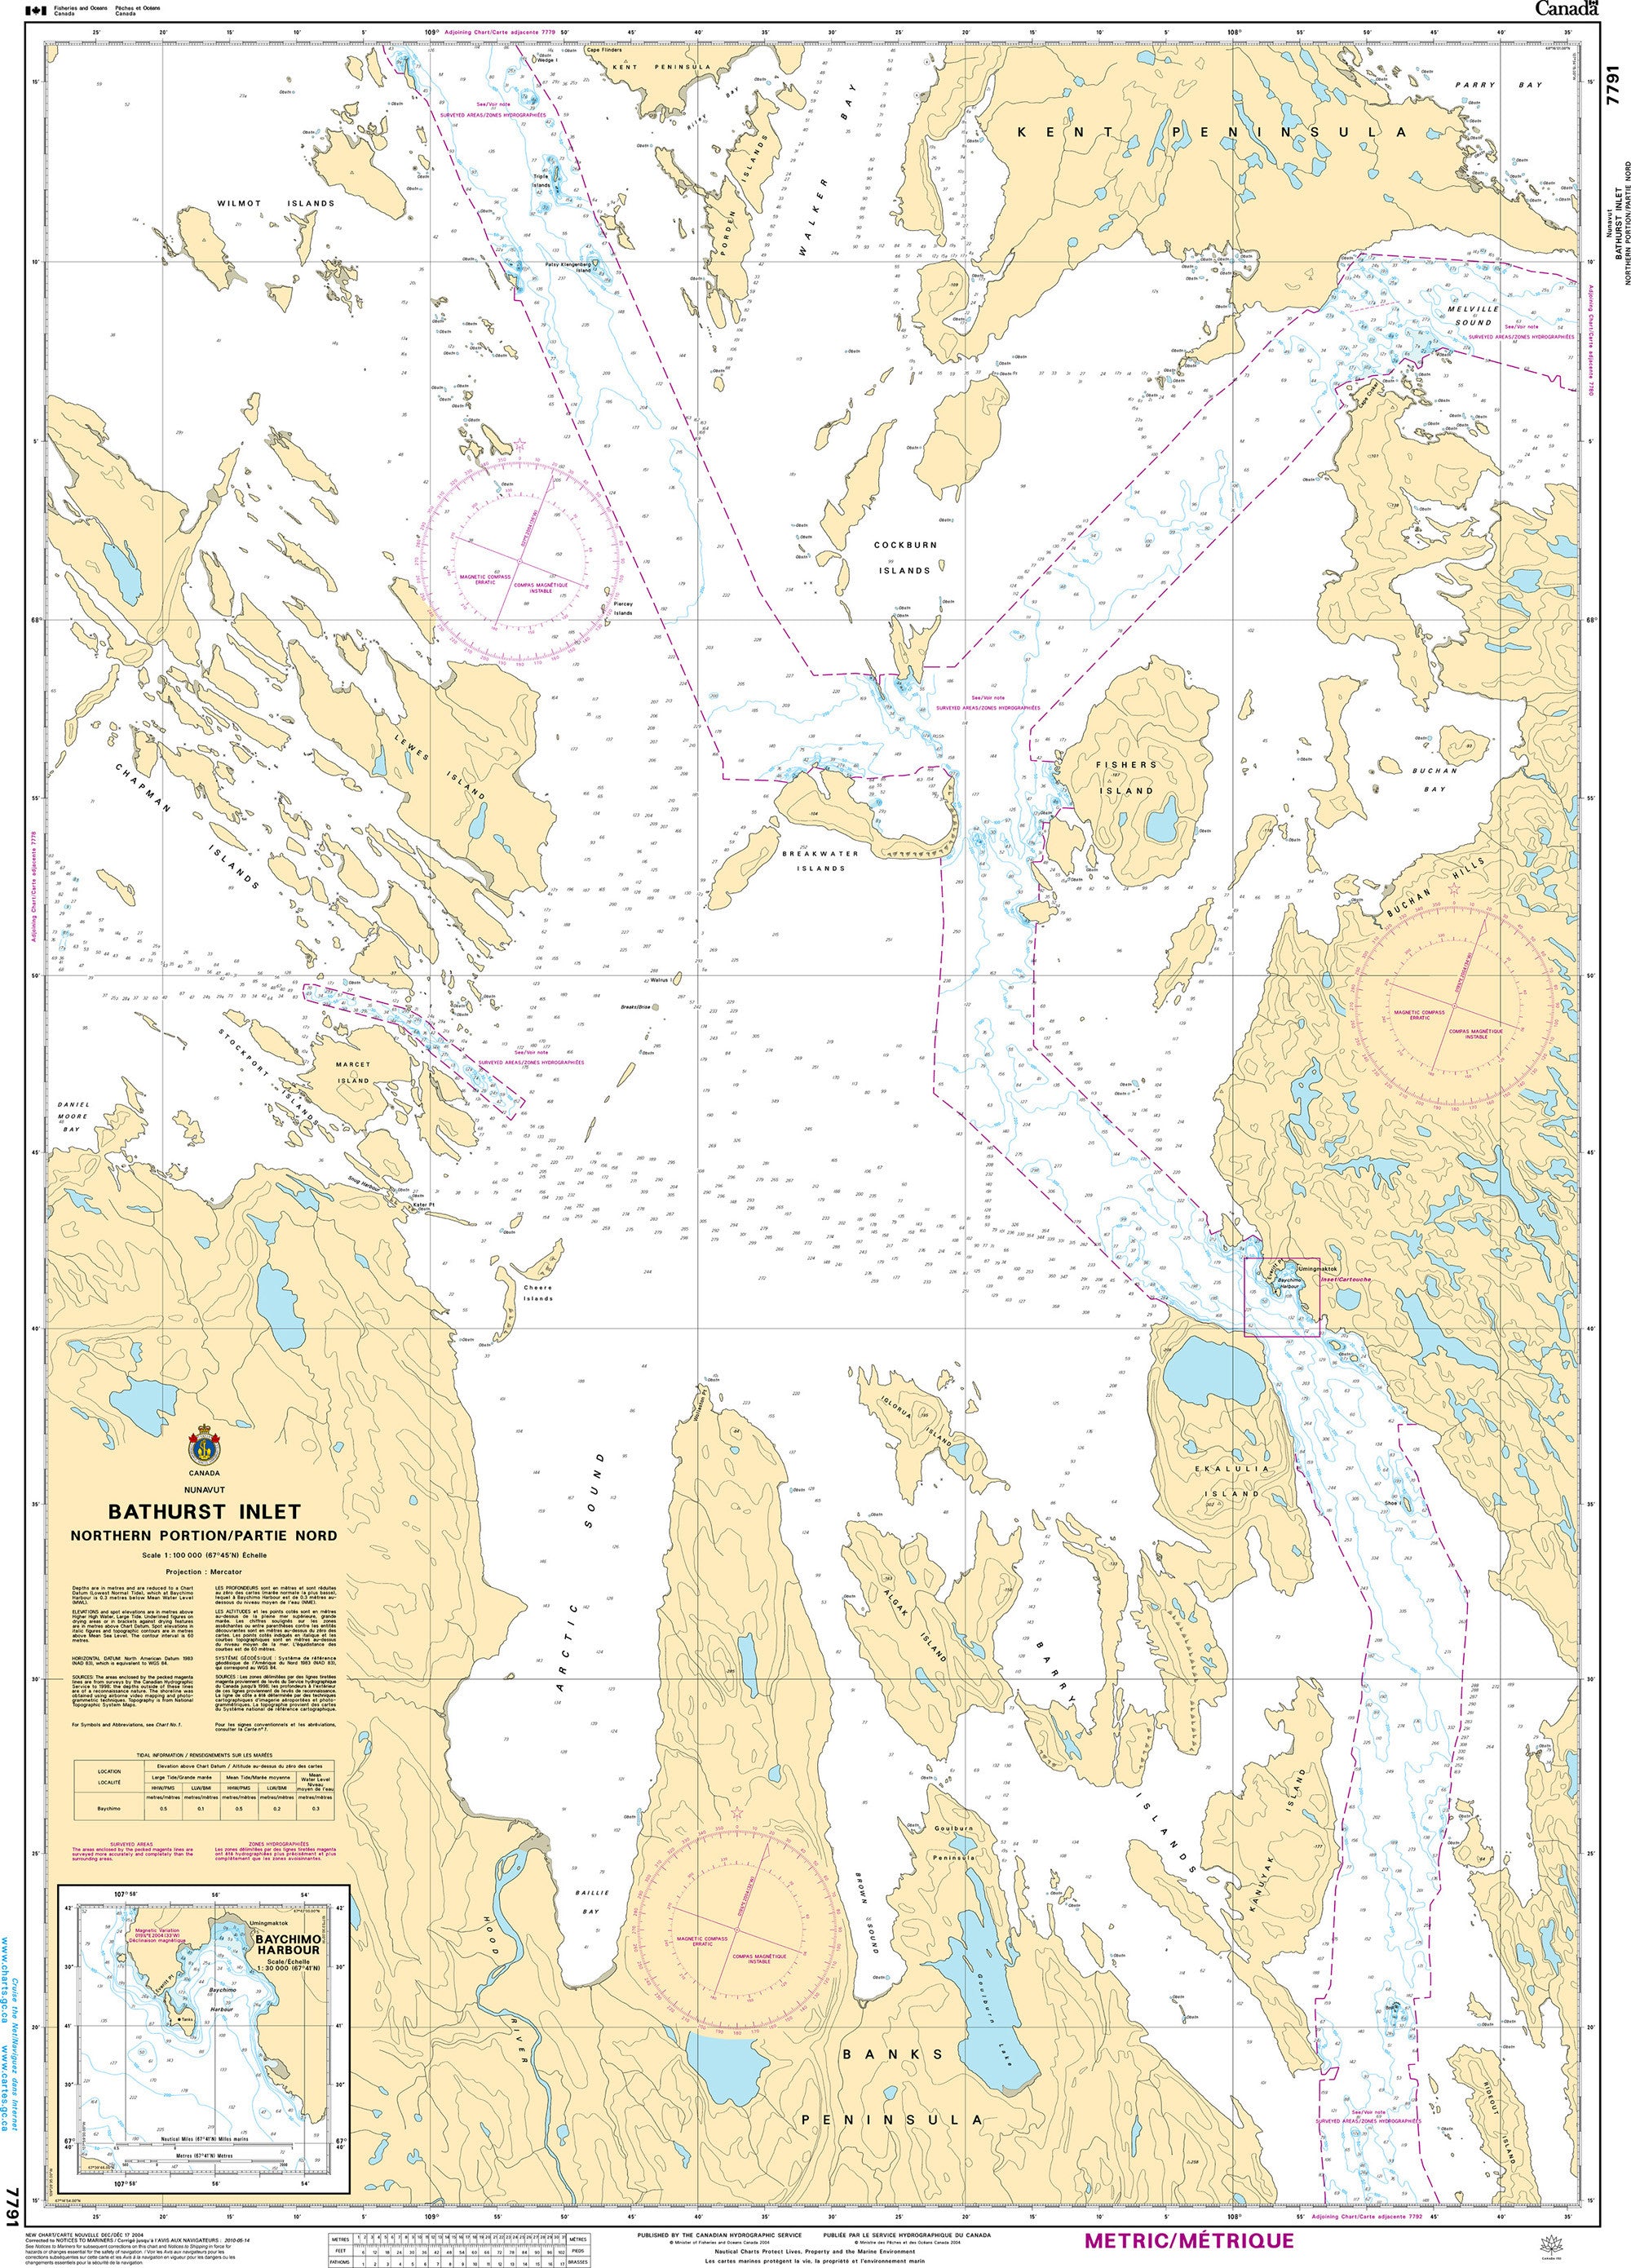 Canadian Hydrographic Service Nautical Chart CHS7791: Bathurst Inlet - Northern Portion/Partie nord